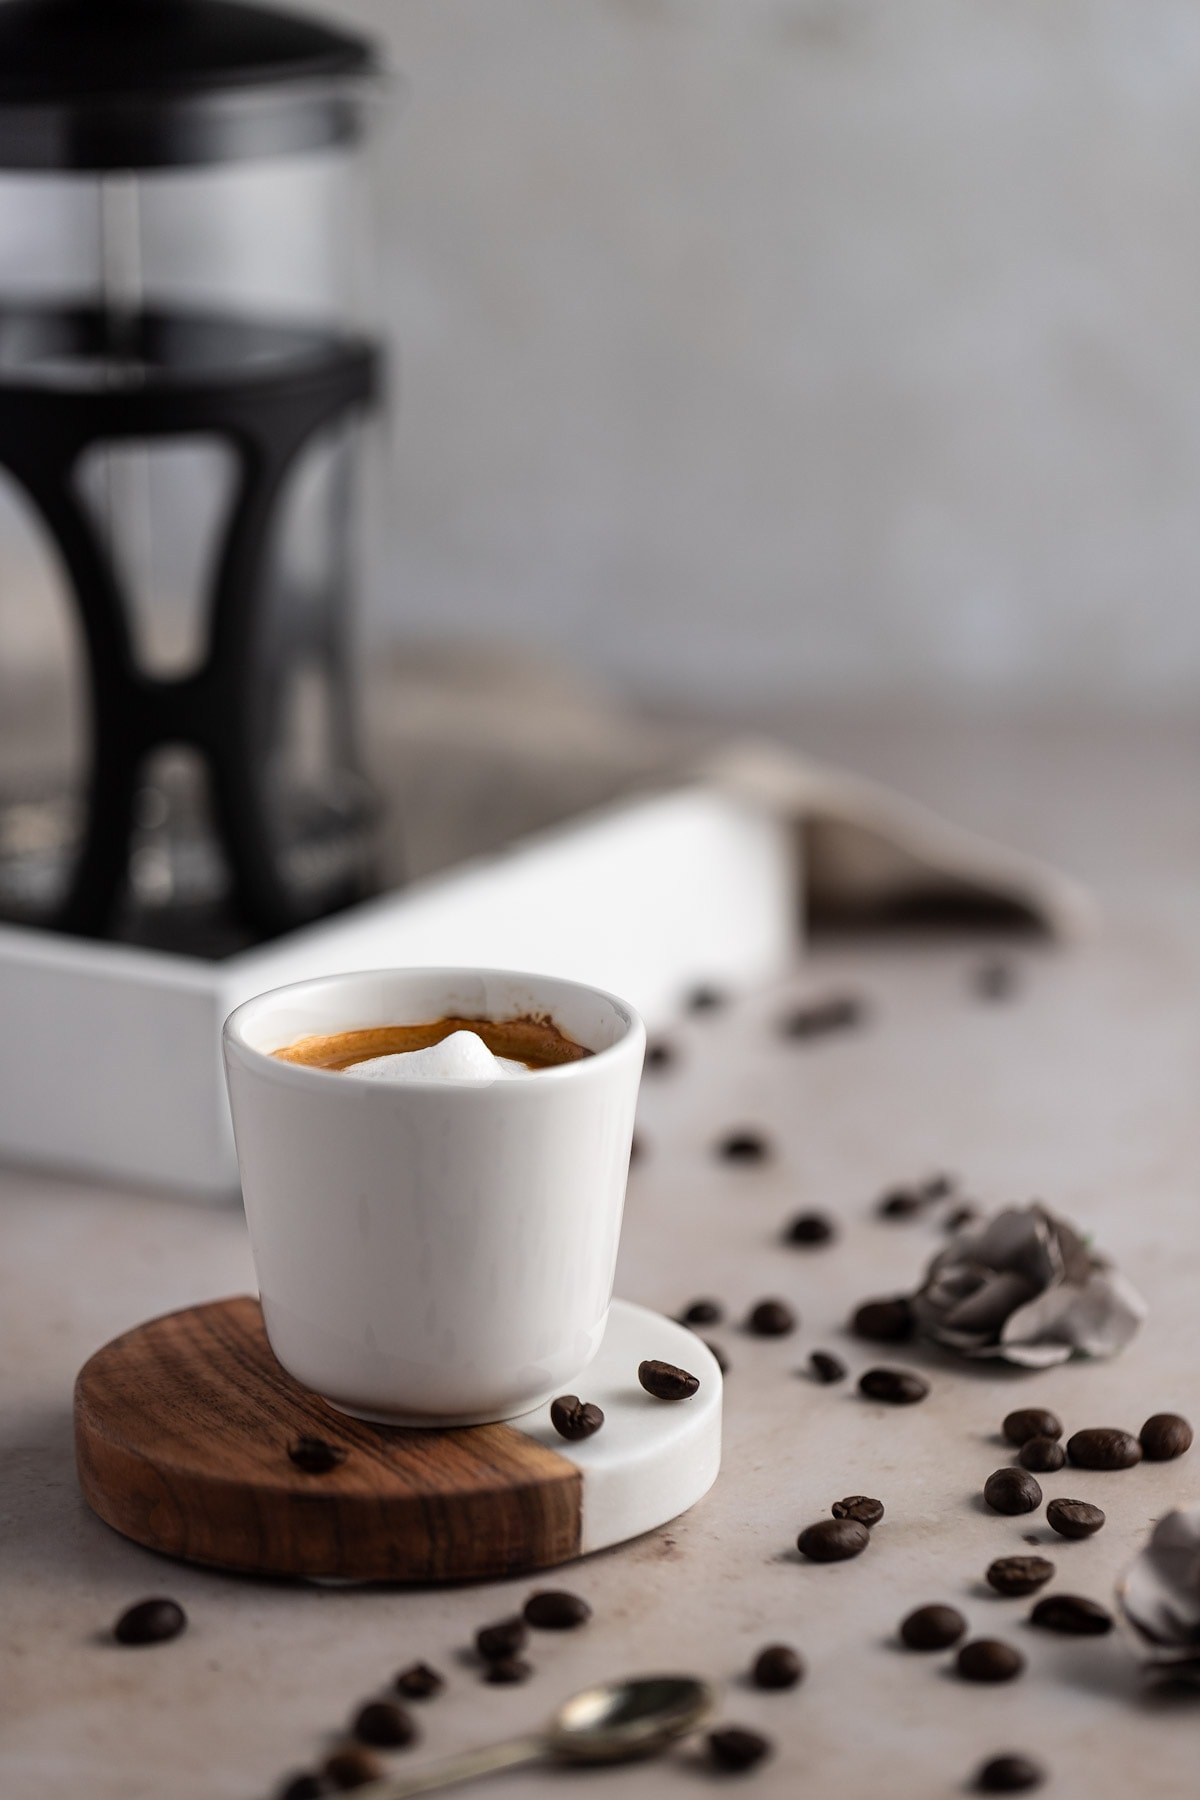 A traditional espresso macchiato in a small white espresso mug on a white and wooden coaster, surrounded by scattered coffee beans.